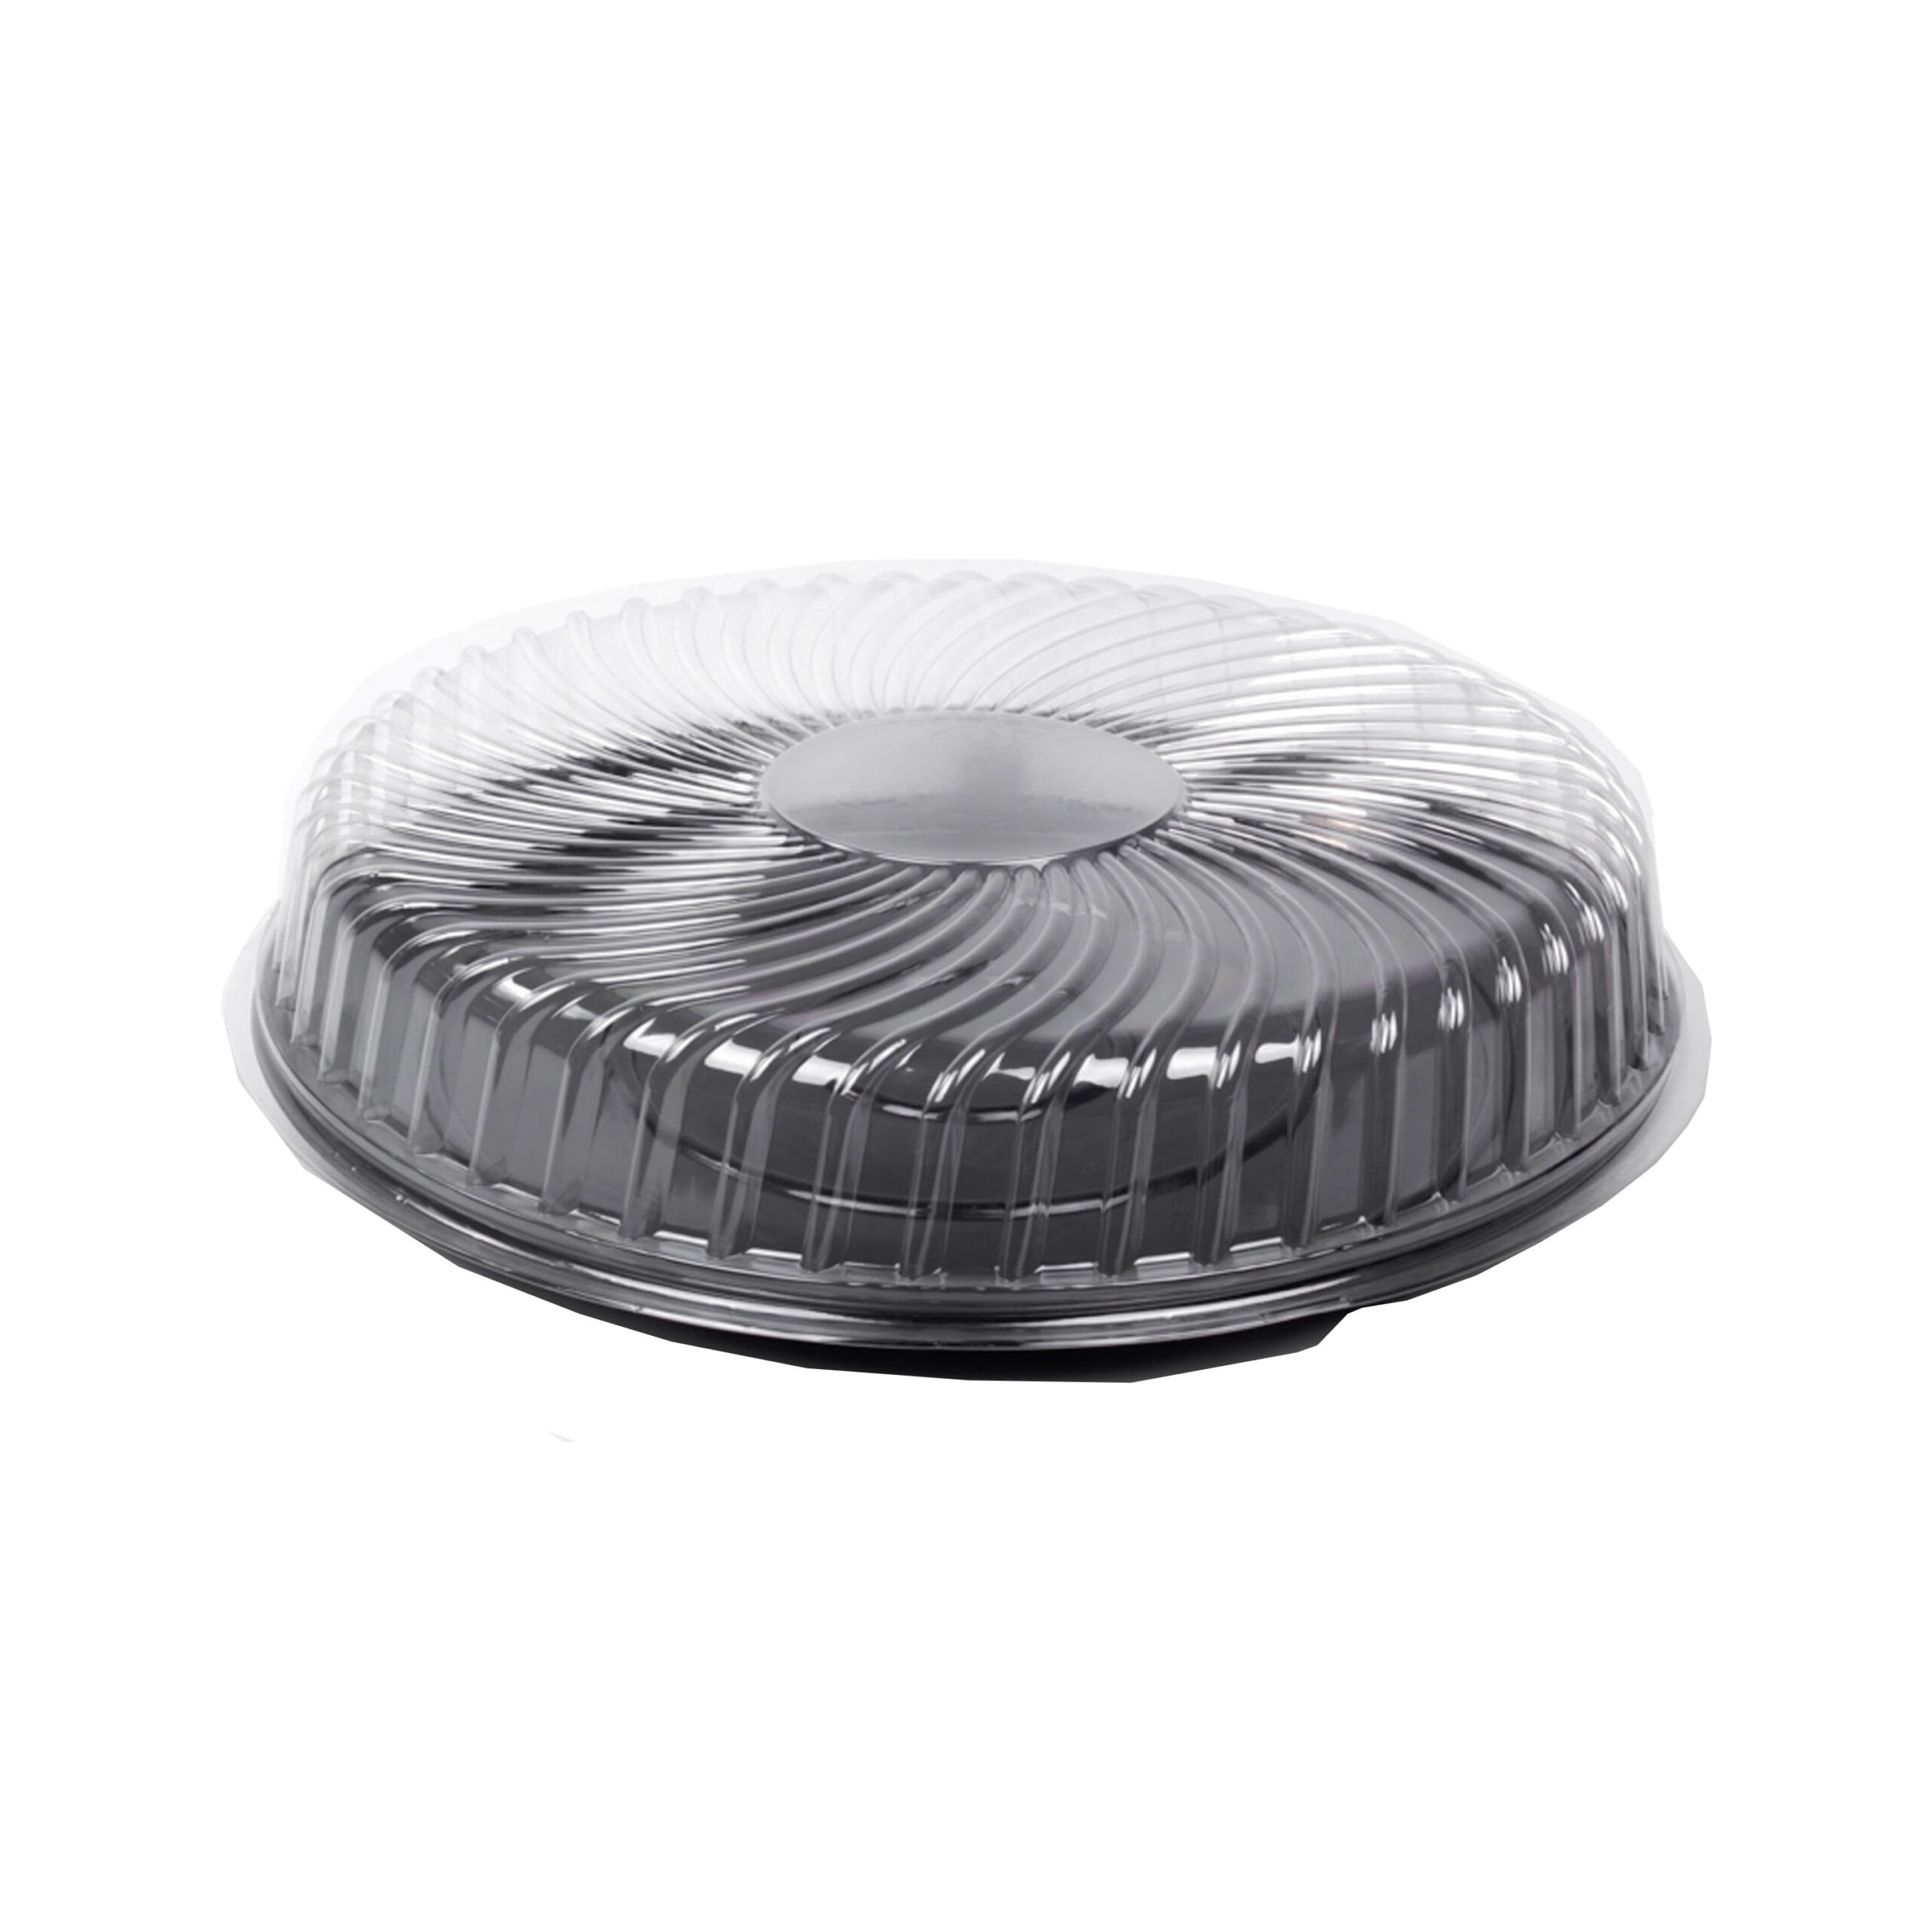 PLASTIC CLEAR DOME FOR CATERING PLATTERS 450 dx70mm P744 - 1x1